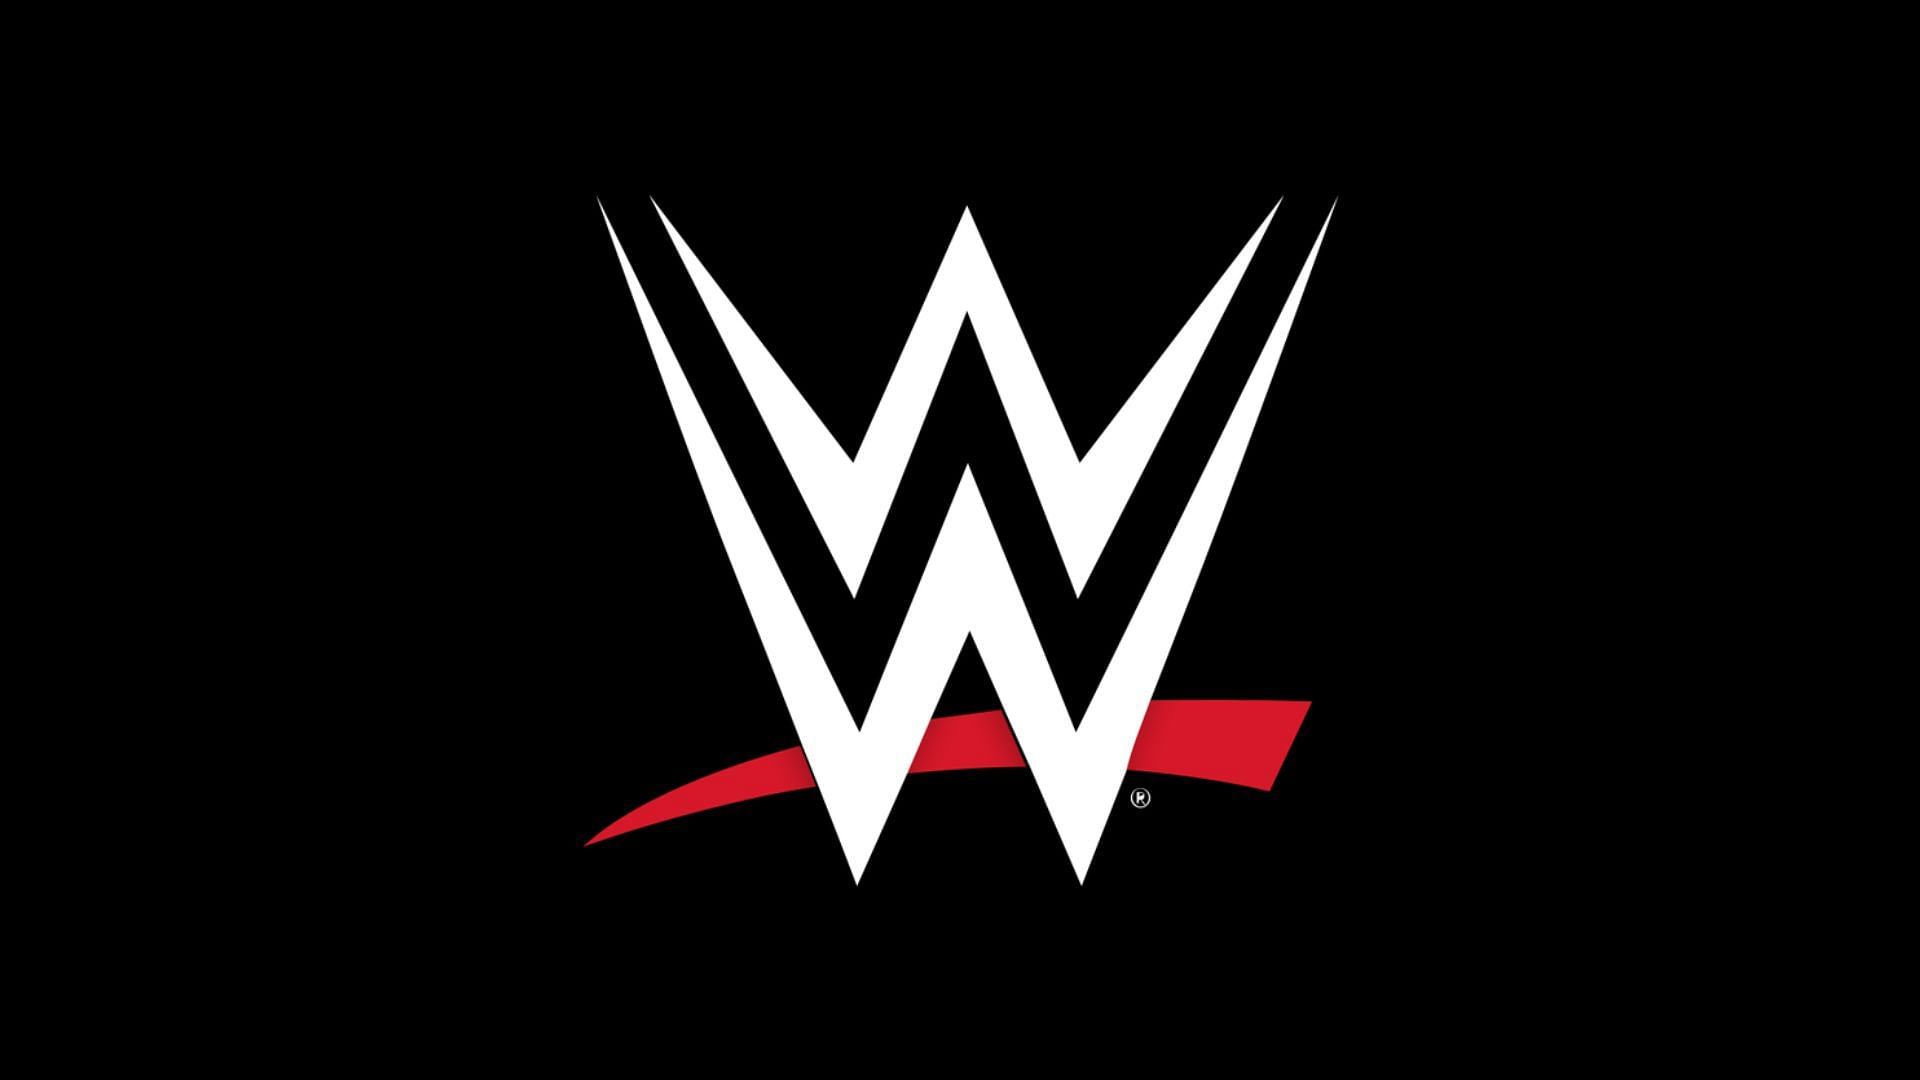 Former WWE Superstars often return to the company.